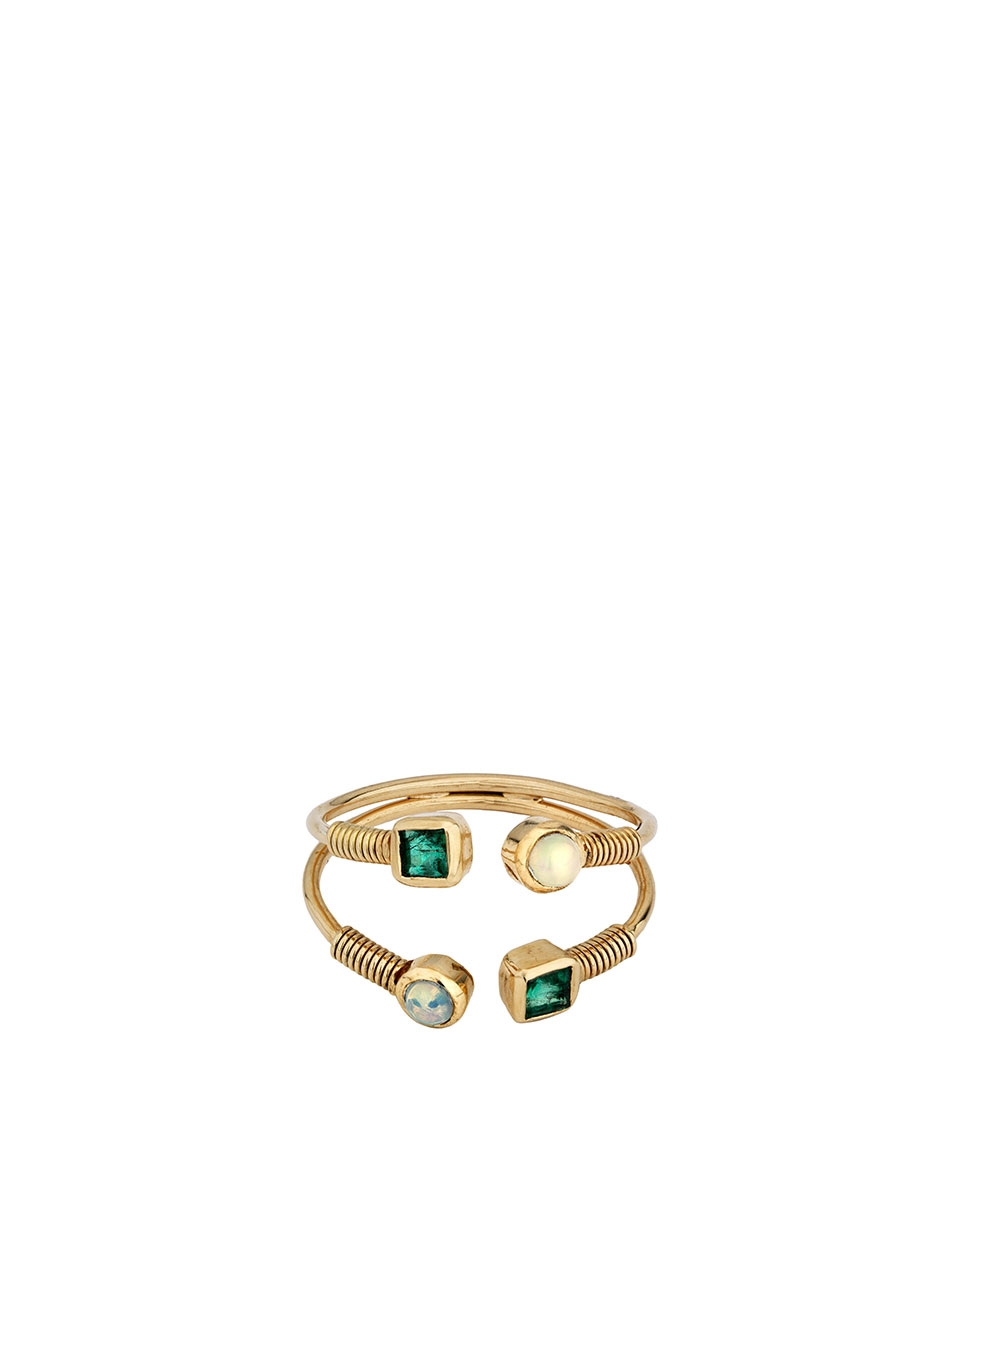 YELLOW GOLD DOUBLE RING